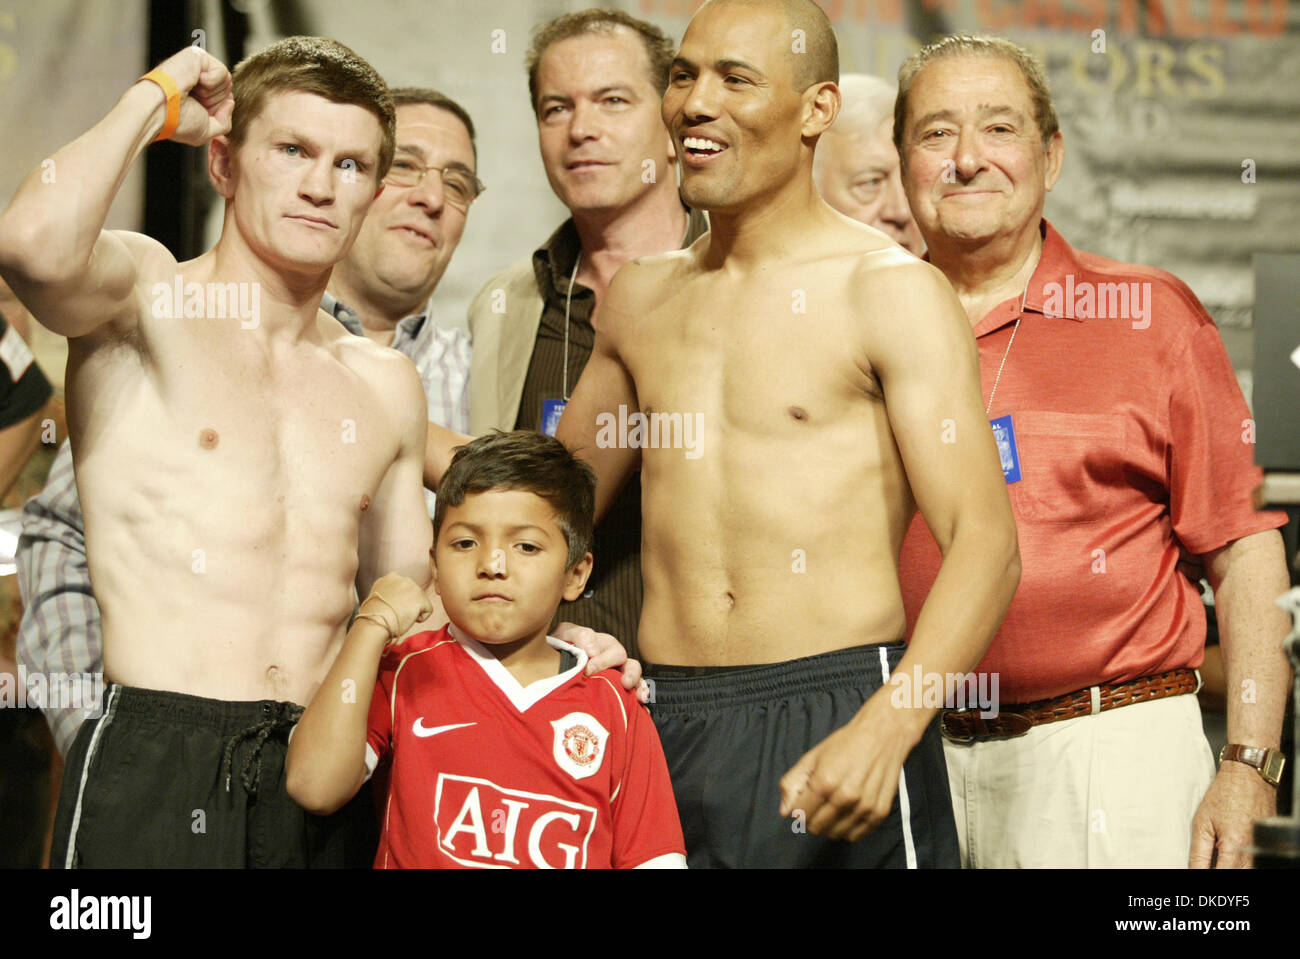 Jun 22, 2007 - Las Vegas, NV, USA - JOSE LUIS CASTILLO & his son (right)  and RICKY HATTON holding the IBO Championship belt at the Caesars Palace  weigh-ins for the Jr